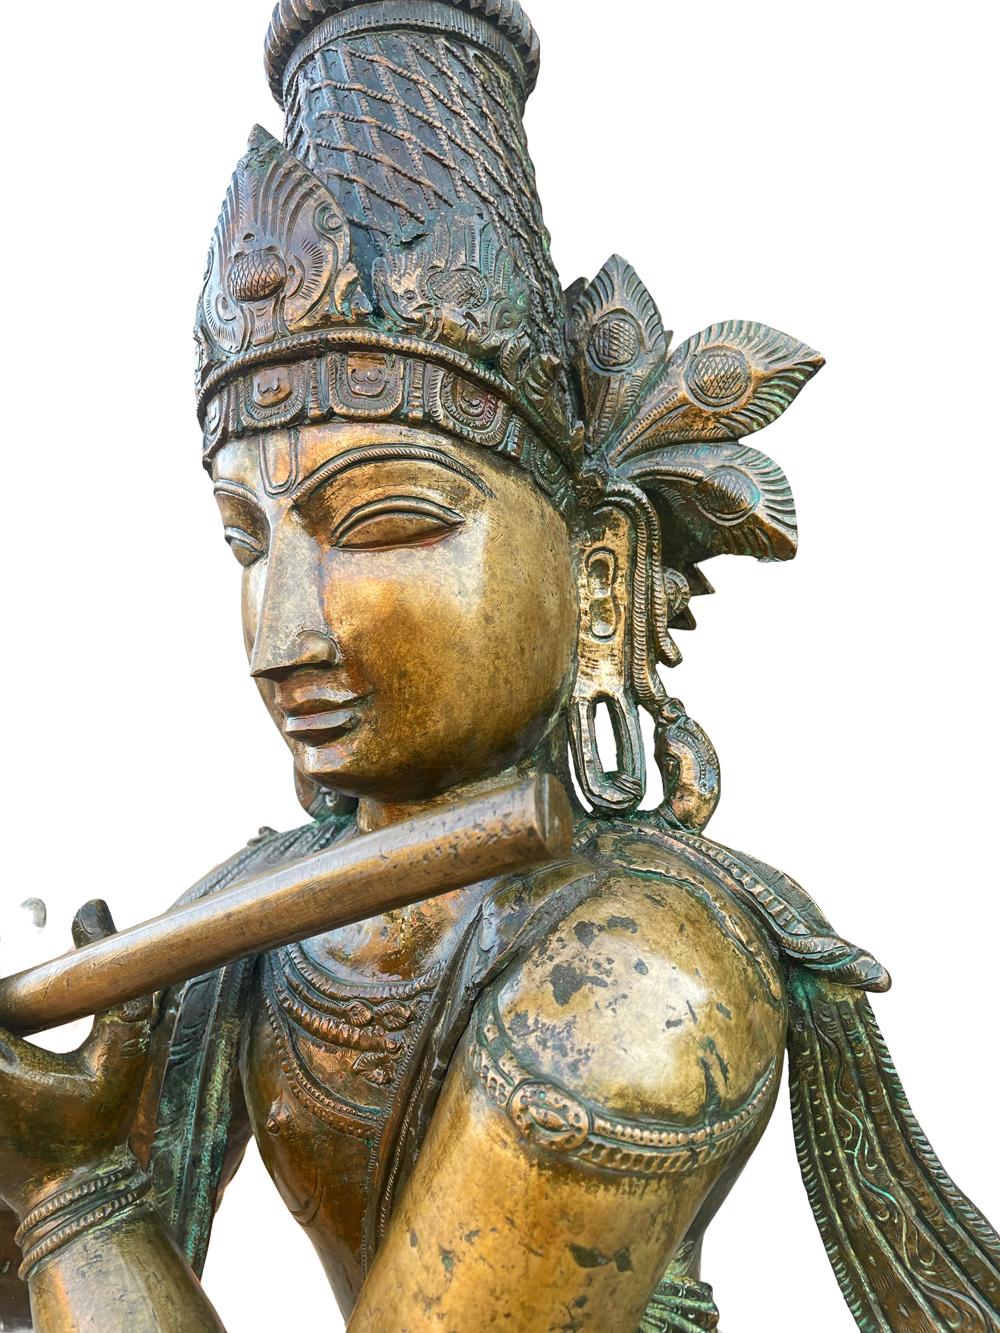 This statue stands over 4 feet tall and made of heavy cast bronze. Asian origin from late 19th century. Beautiful warm overall patina.